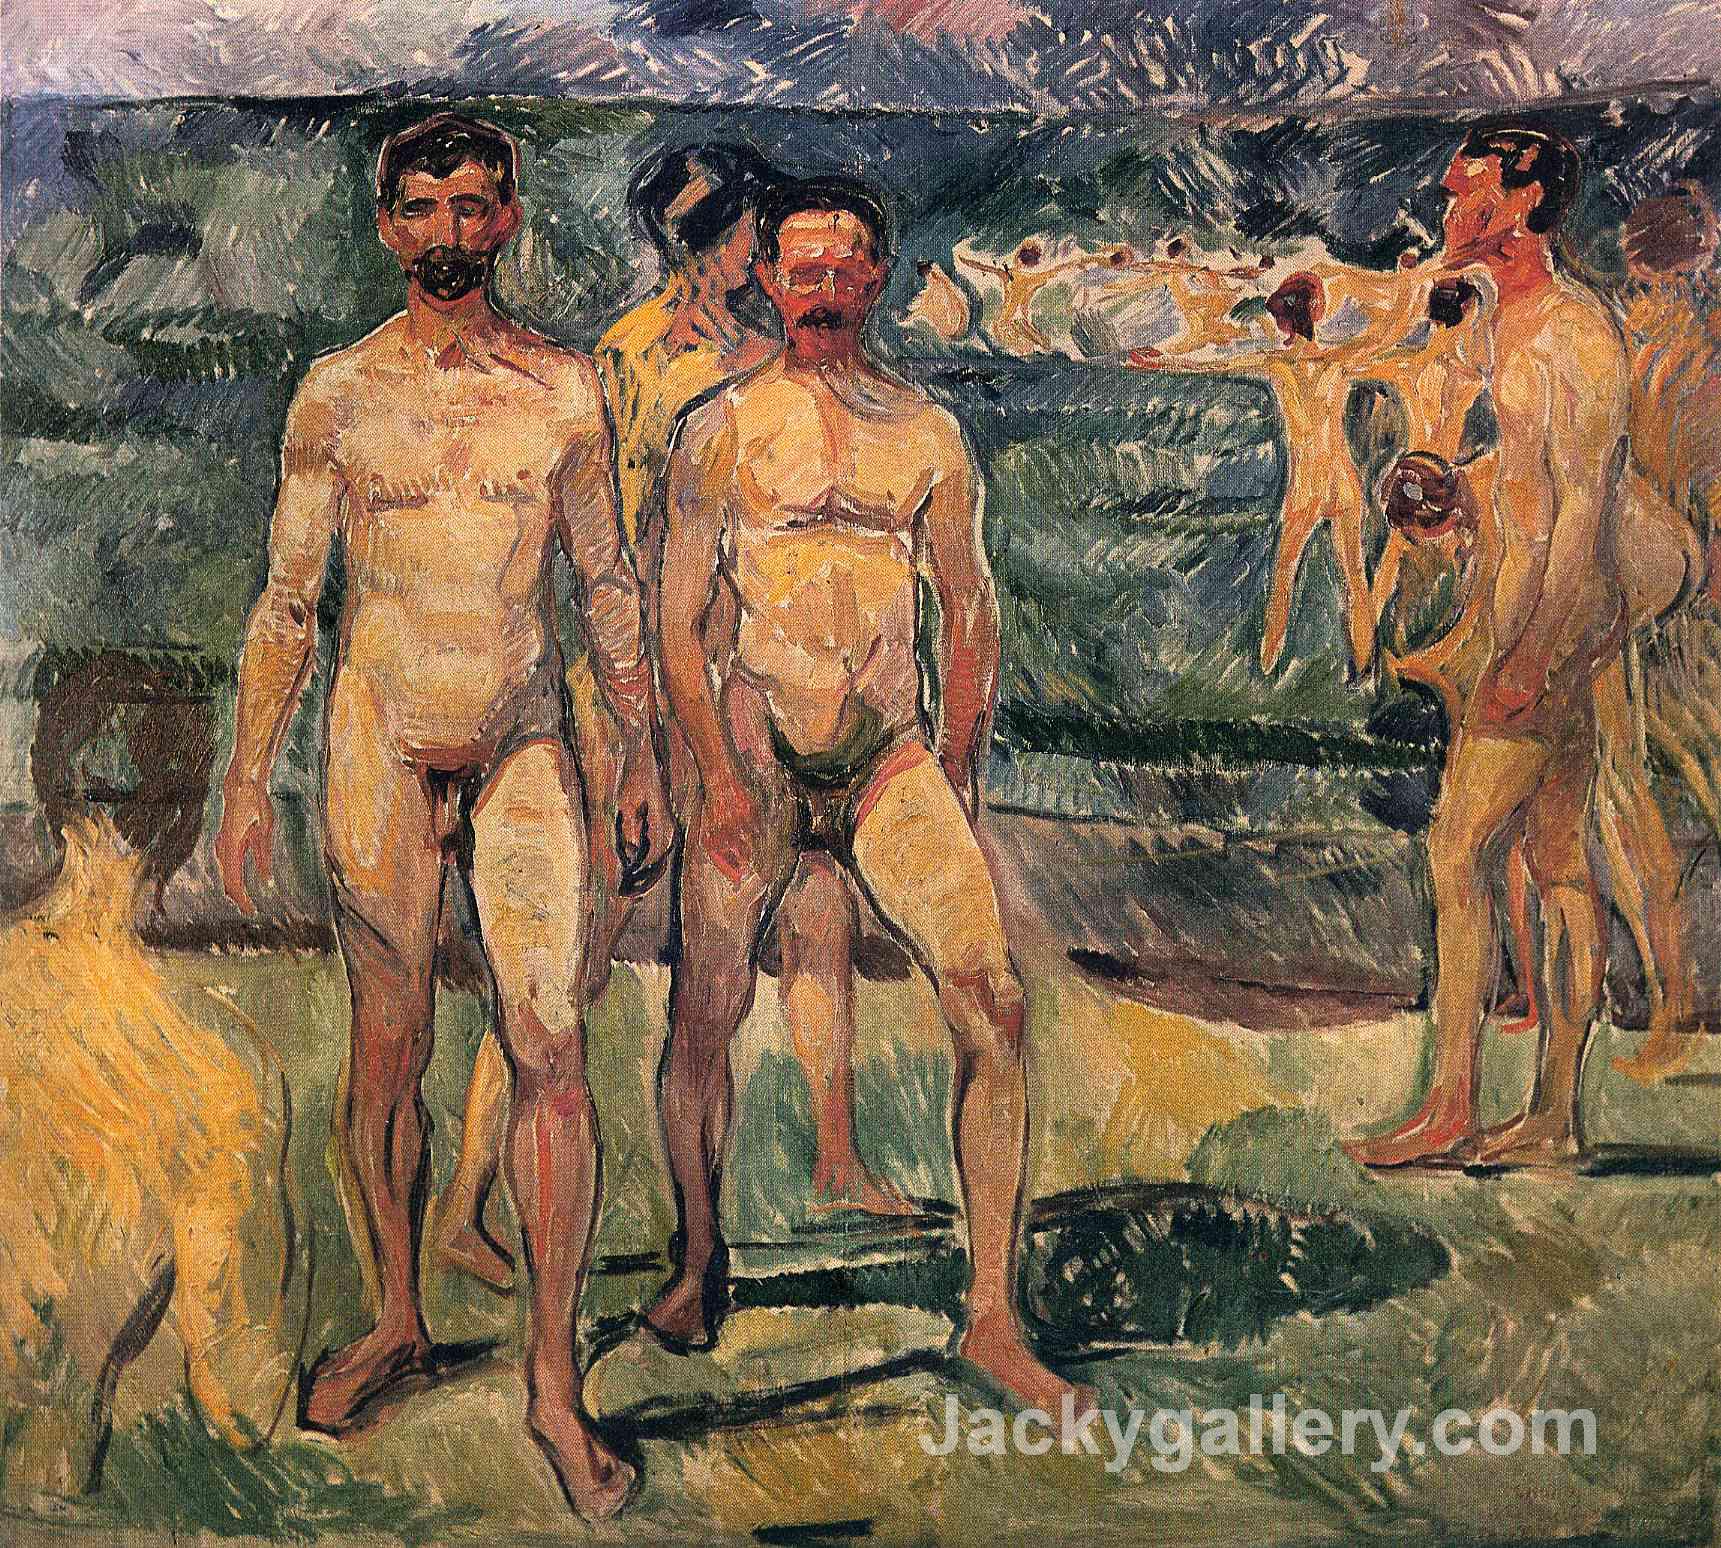 Bathing Men by Edvard Munch paintings reproduction